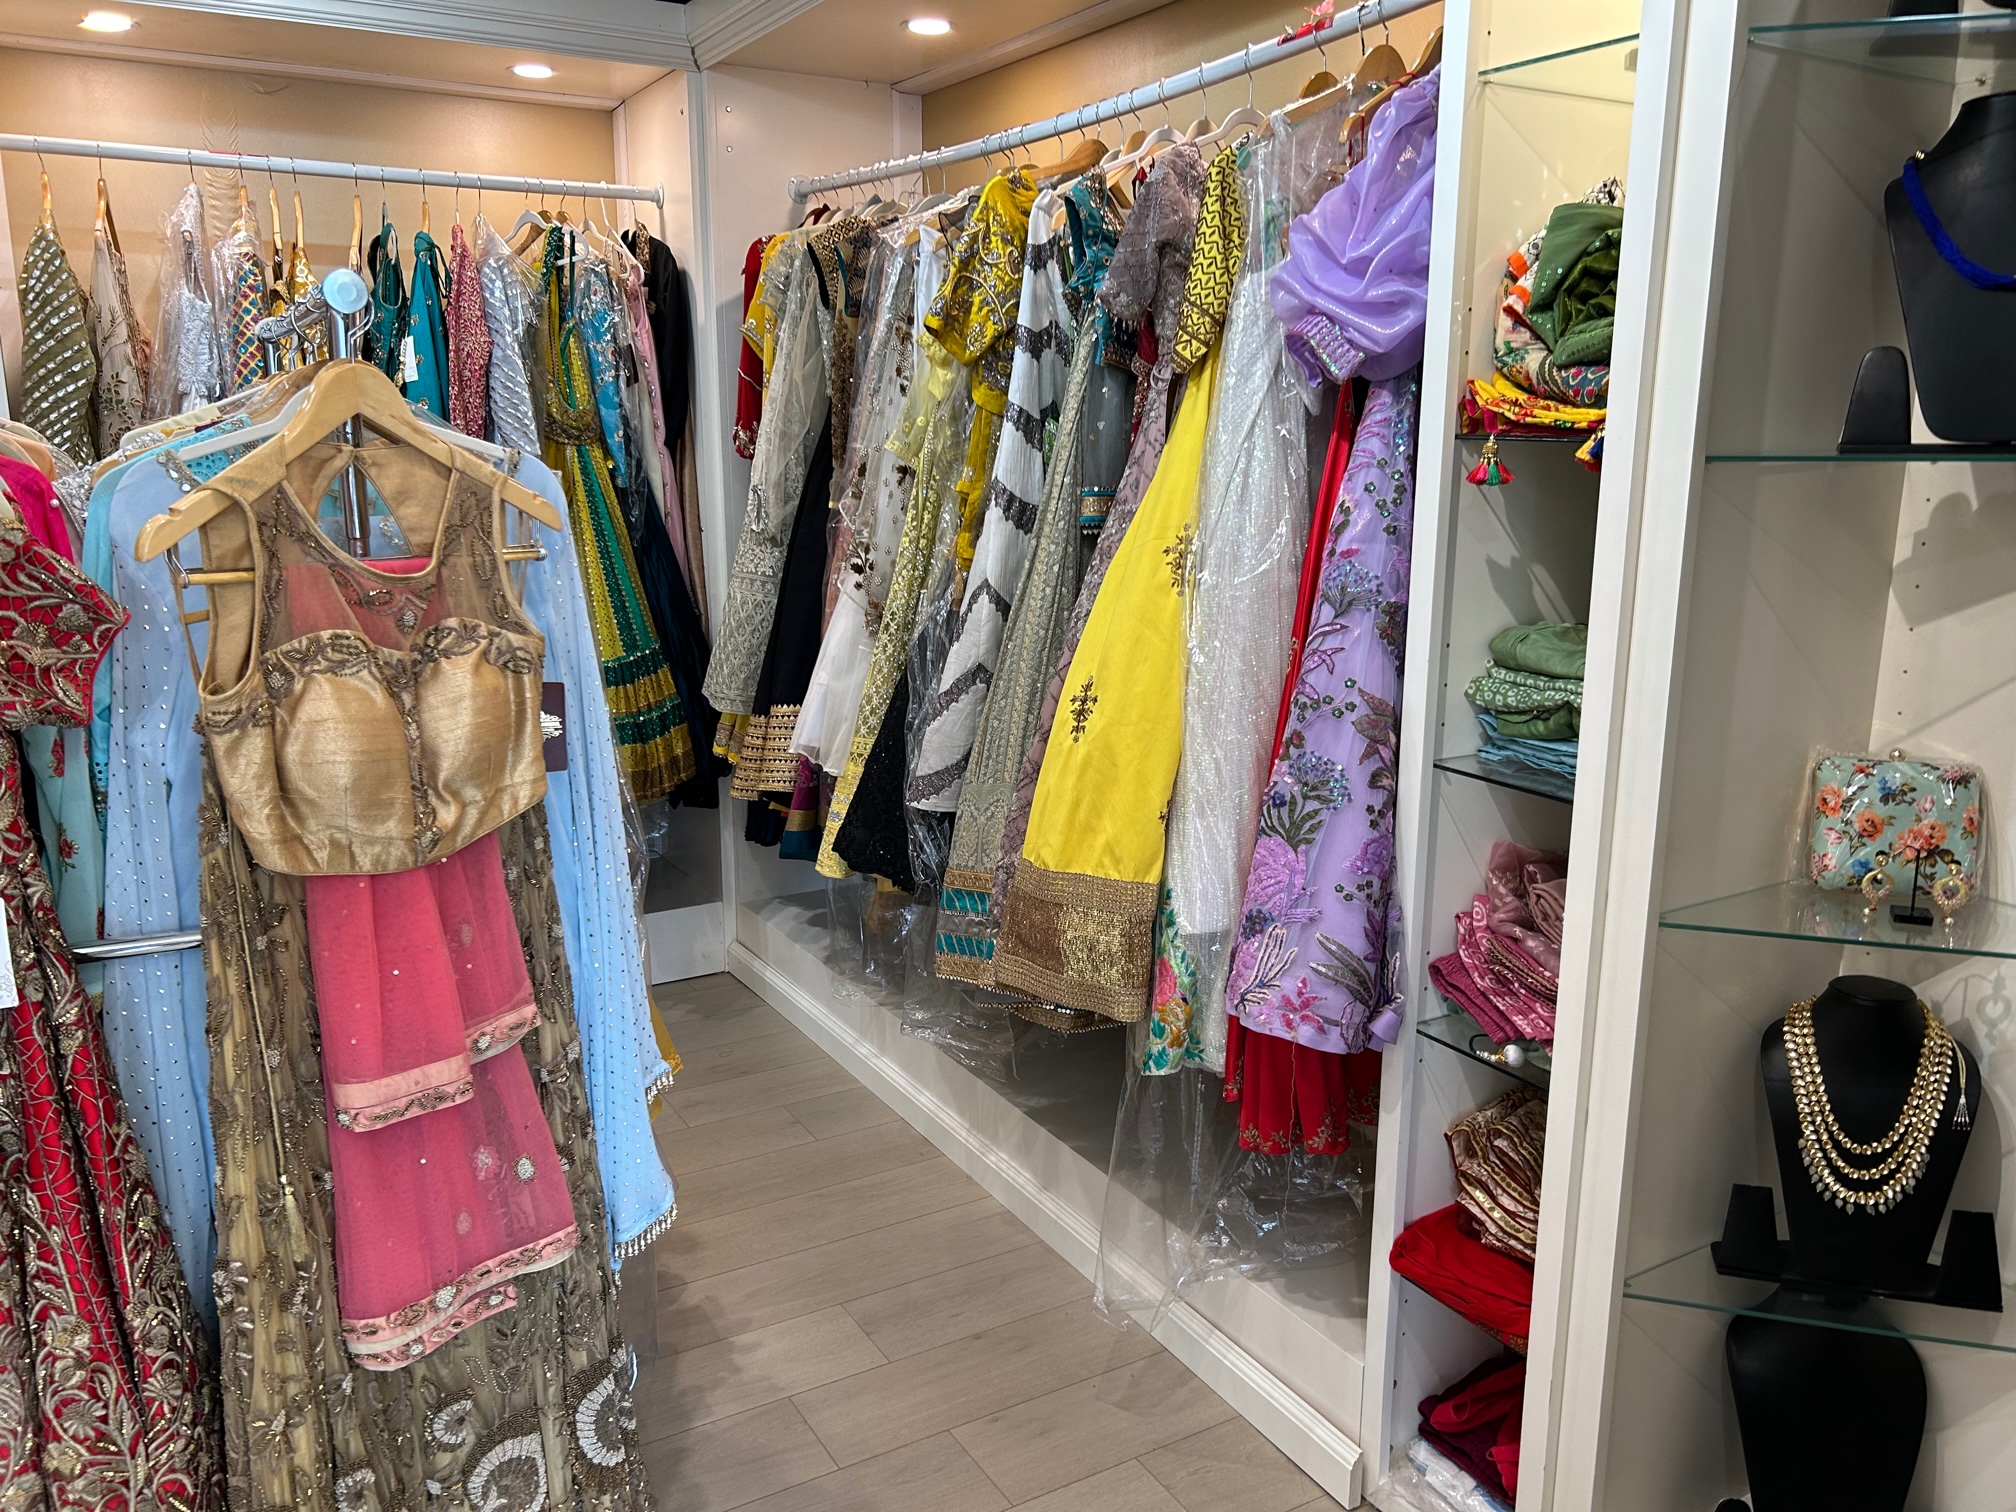 Asset Sale of Ethnic Clothing Store in New York